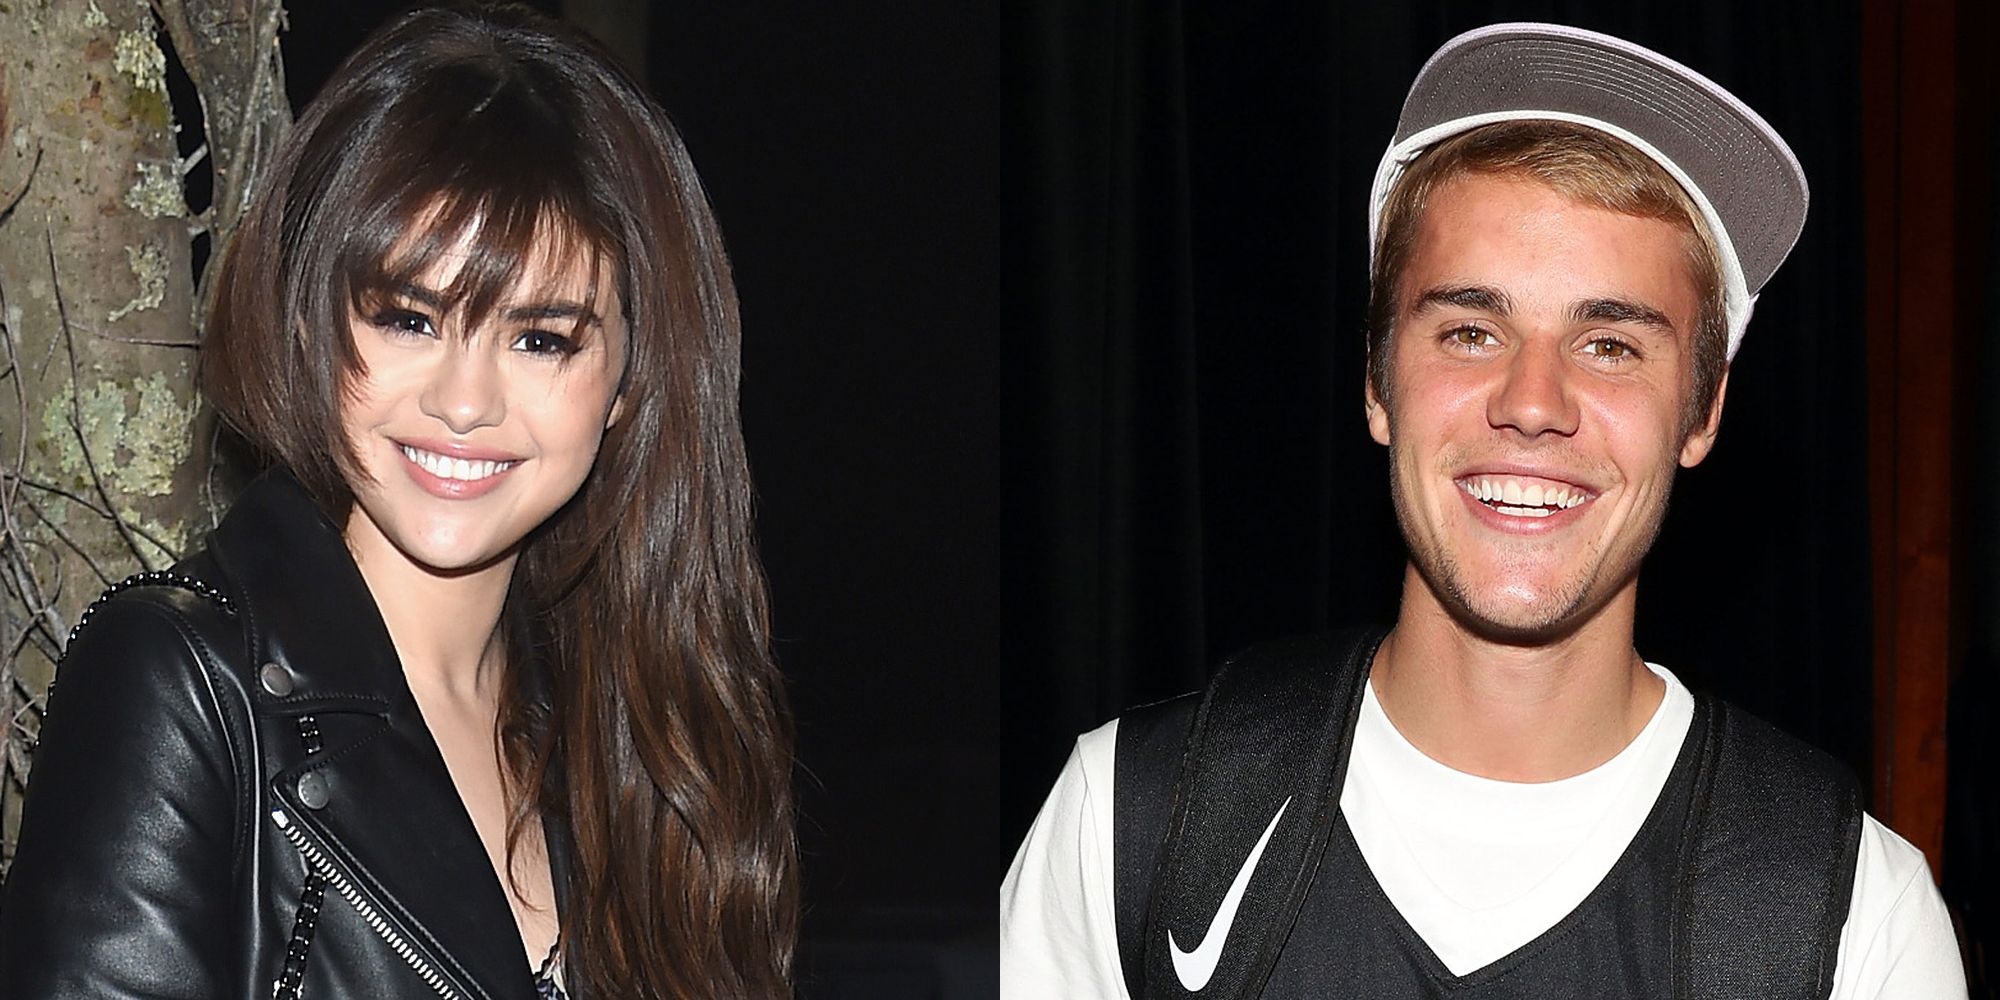 Justin Bieber and Selena Gomez Wore the Same Clothes